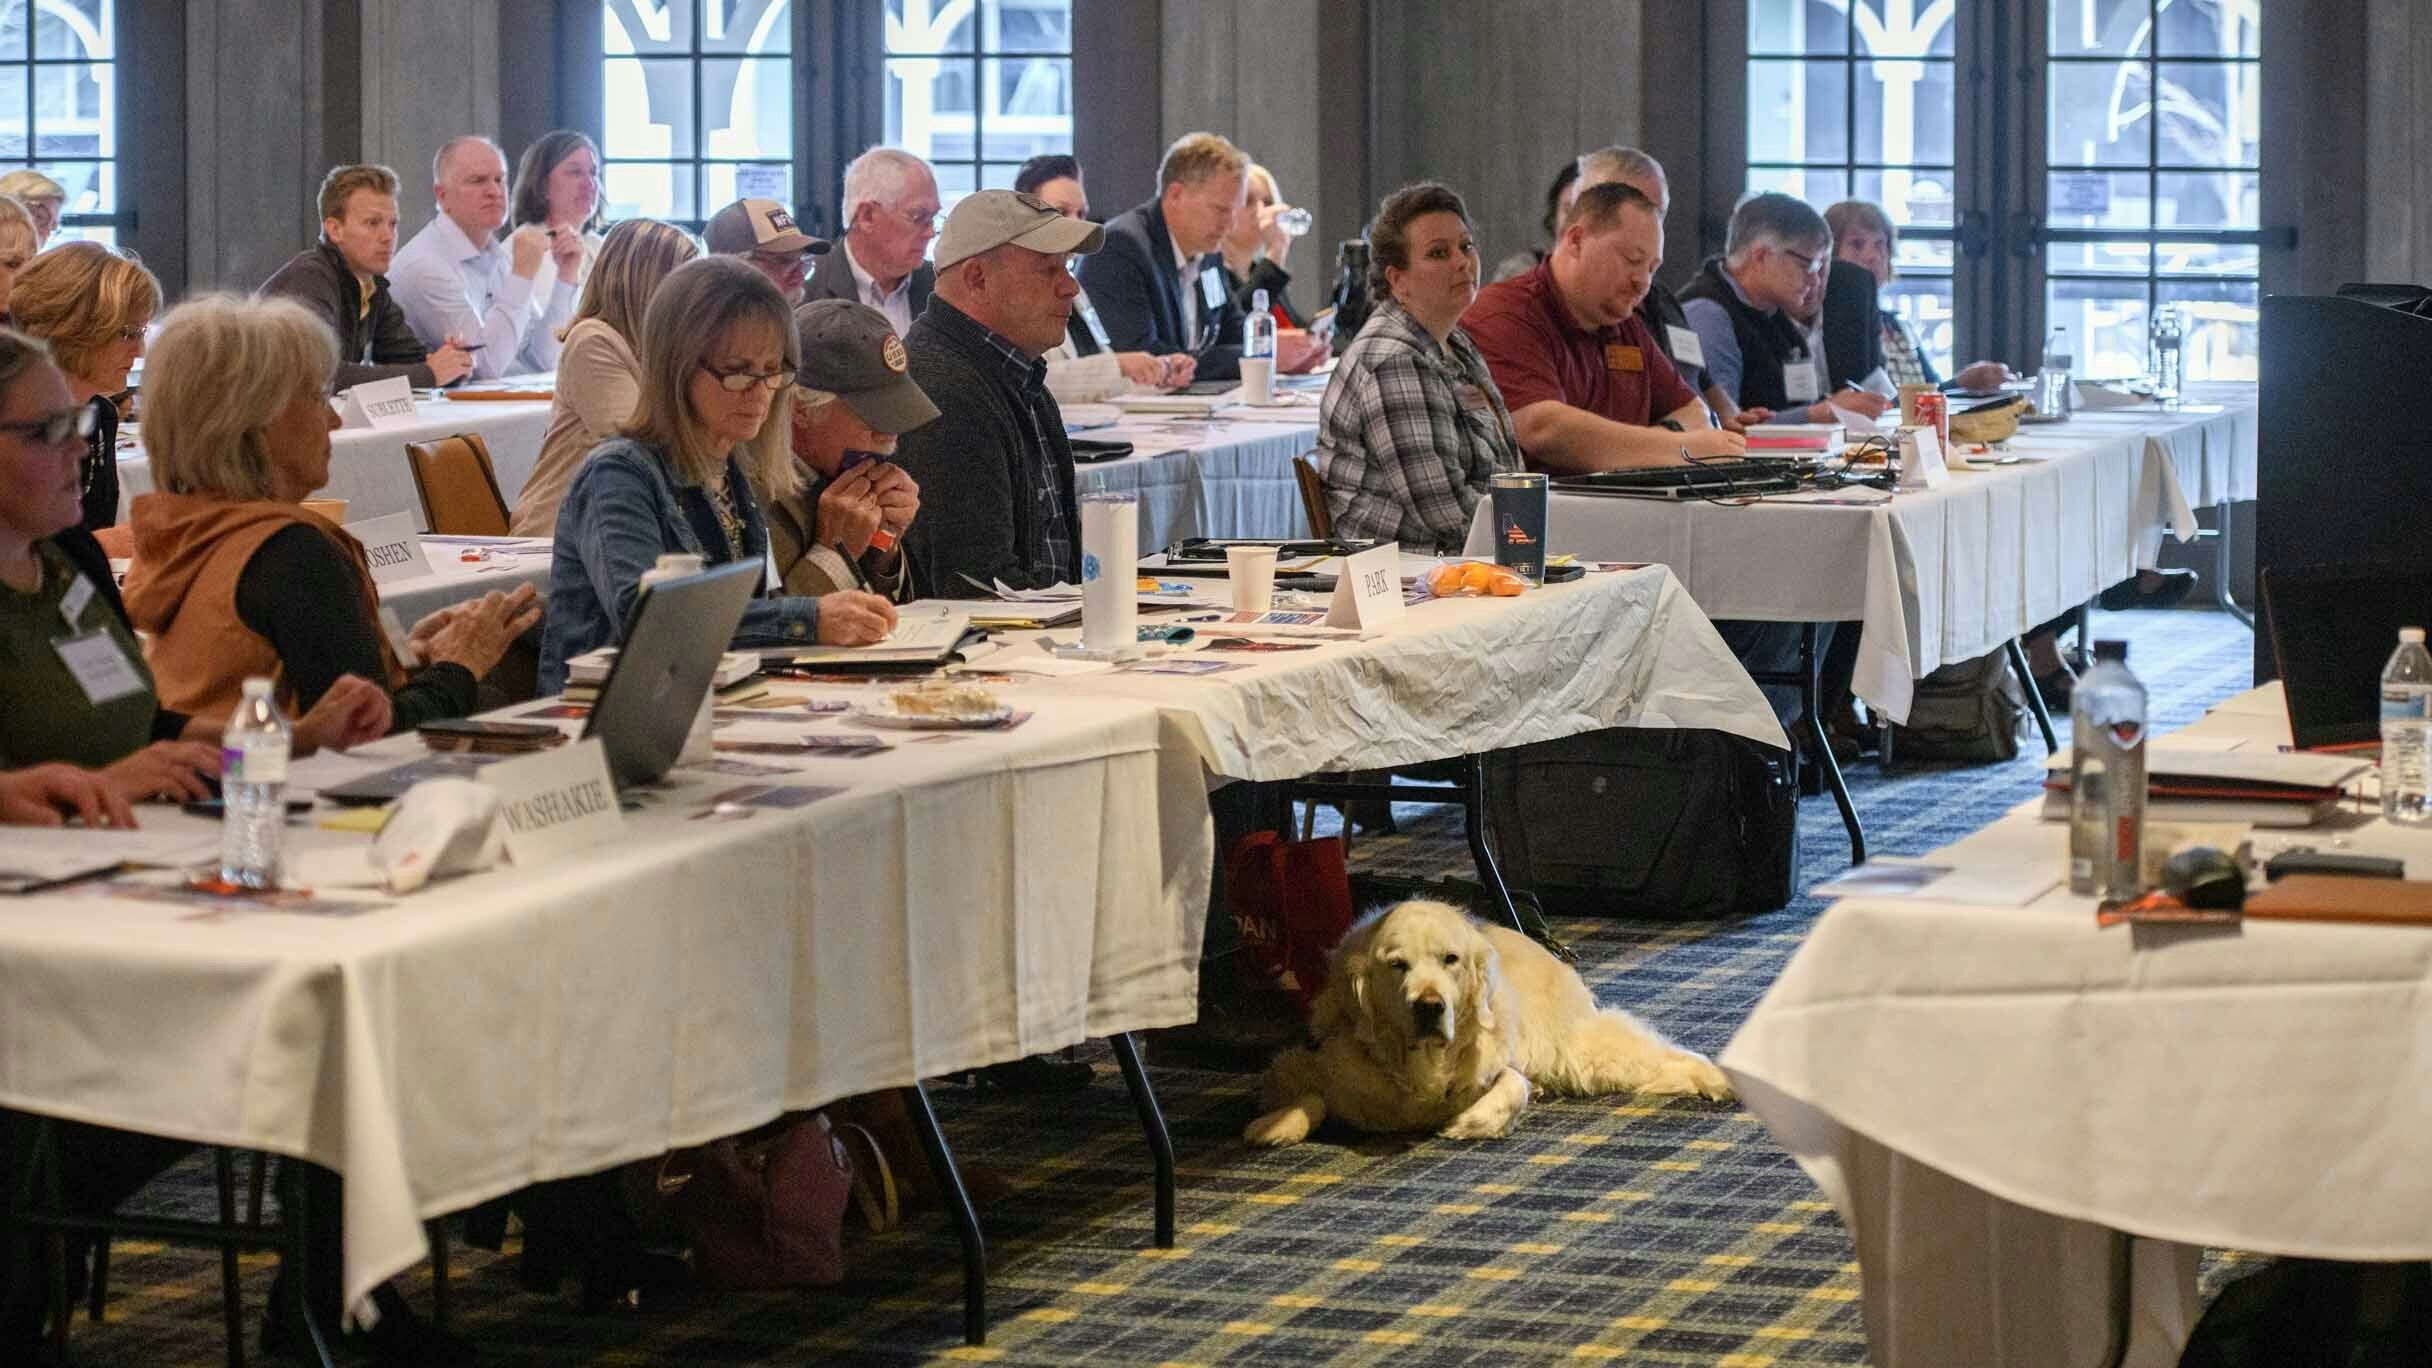 A dog enjoys the state GOP meeting in Jackson, Wyoming.